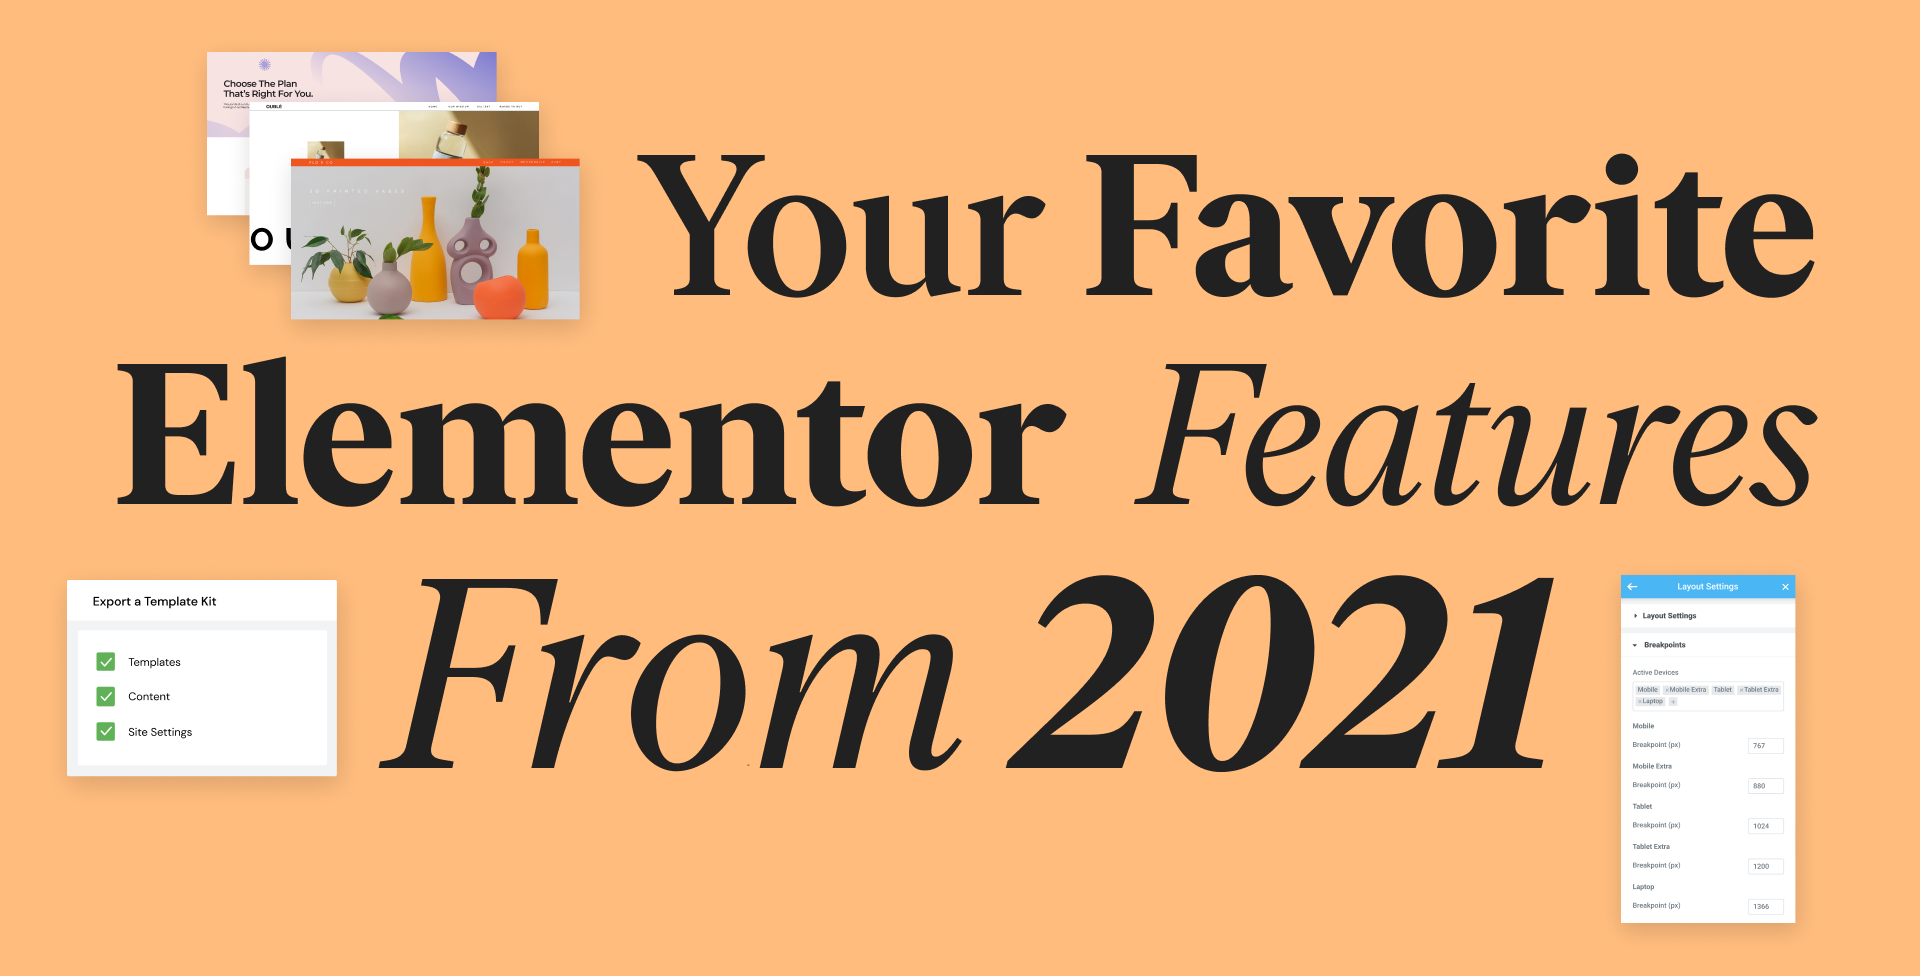 Your favorite elementor features 2021 blog cover